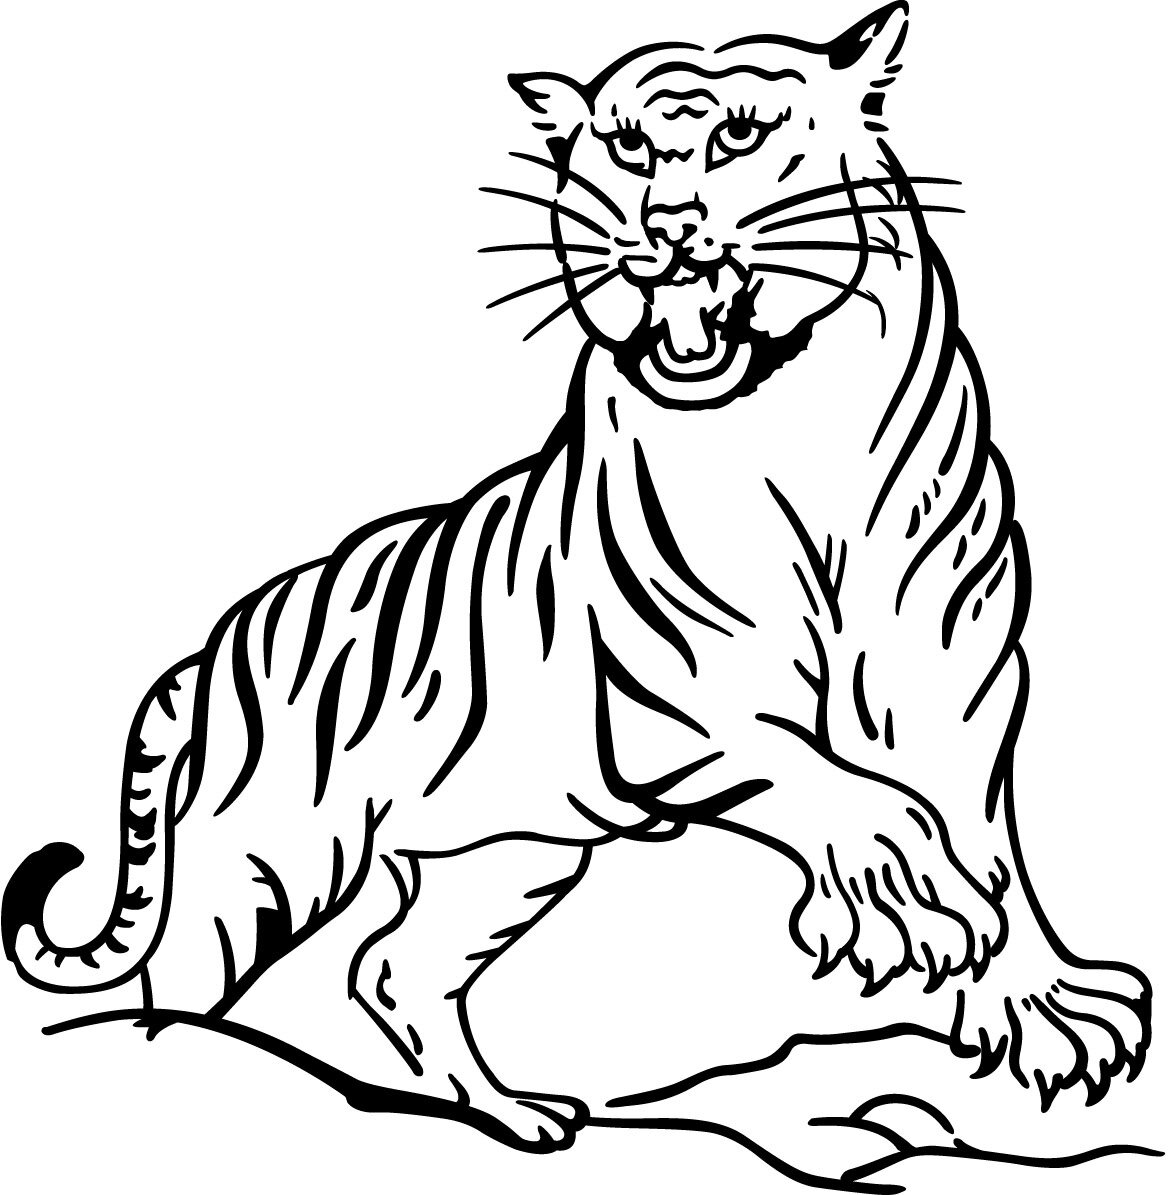 Free printable preschool coloring pages worksheets,tiger, turtle, truck coloring pages